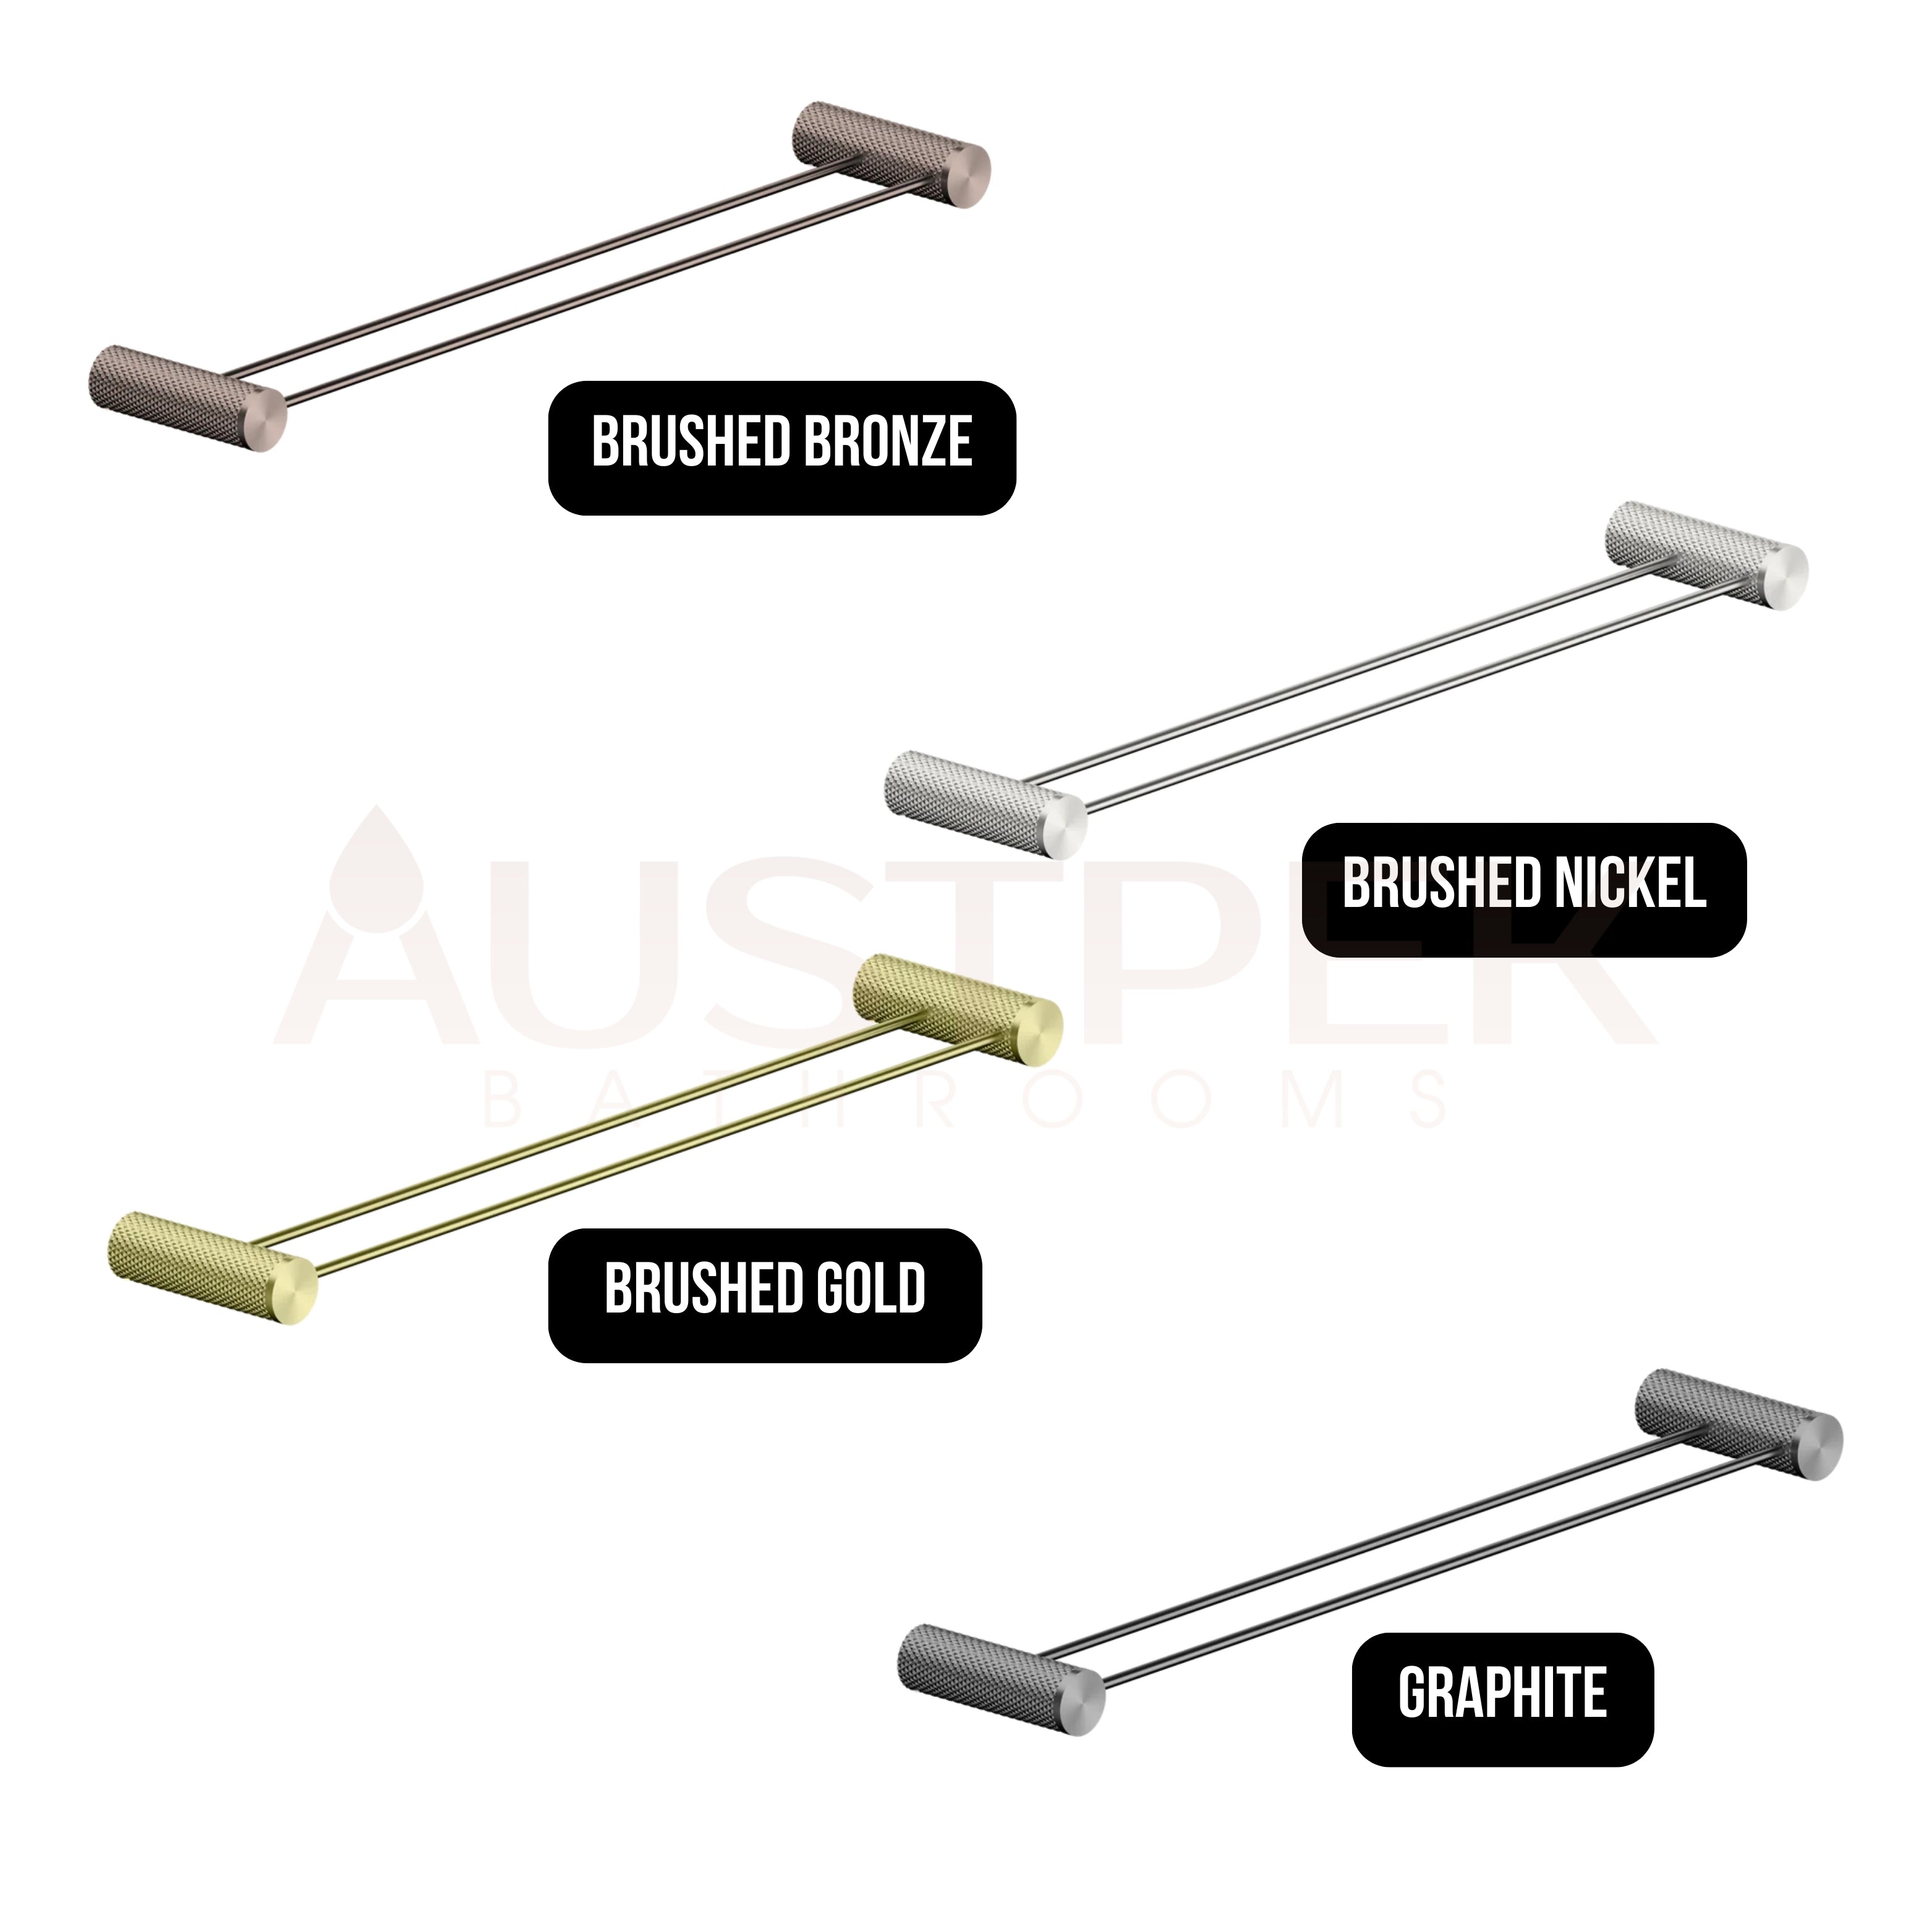 NERO OPAL NON-HEATED DOUBLE TOWEL RAIL BRUSHED BRONZE (AVAILABLE IN 600MM AND 800MM)